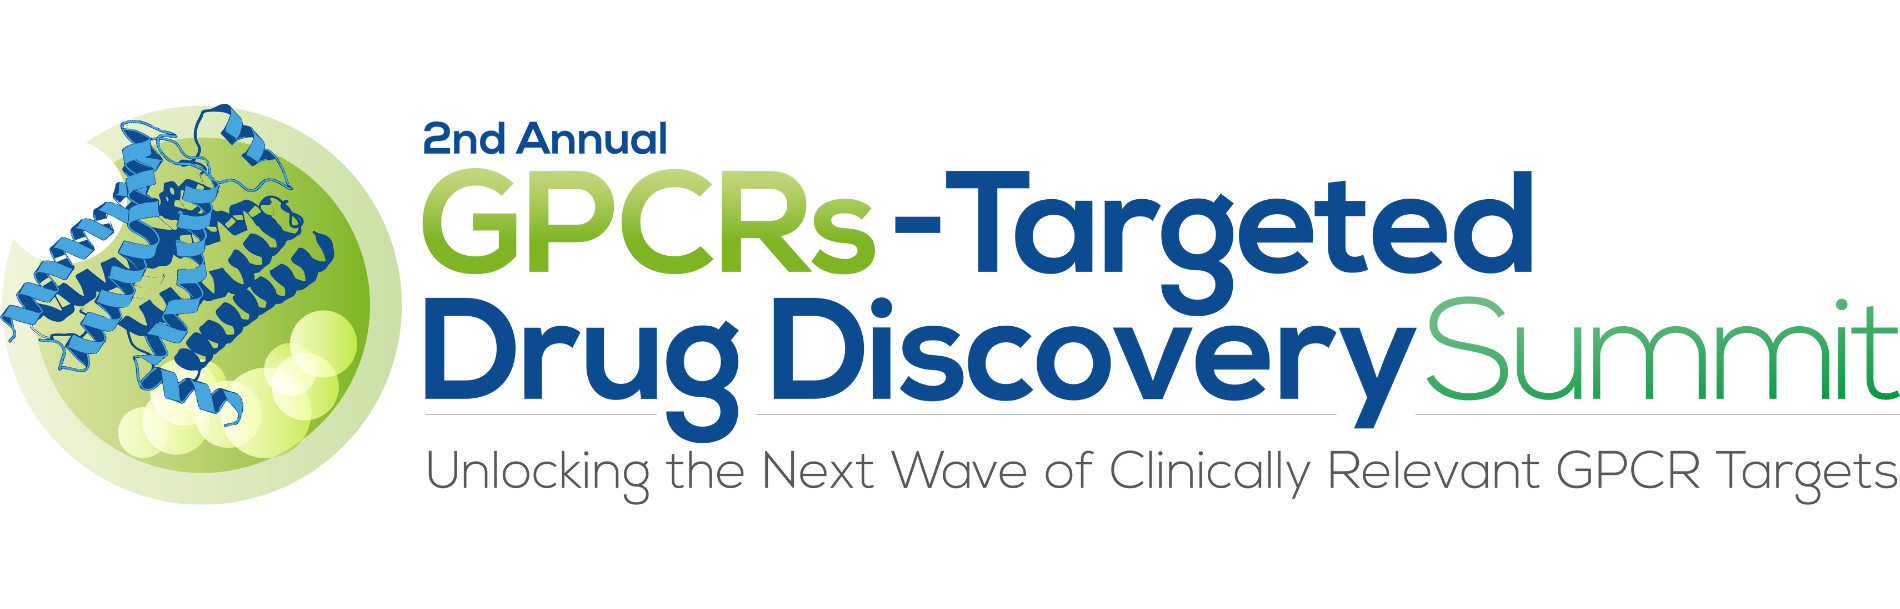 GPCRs-Targeted Drug Discovery Summit